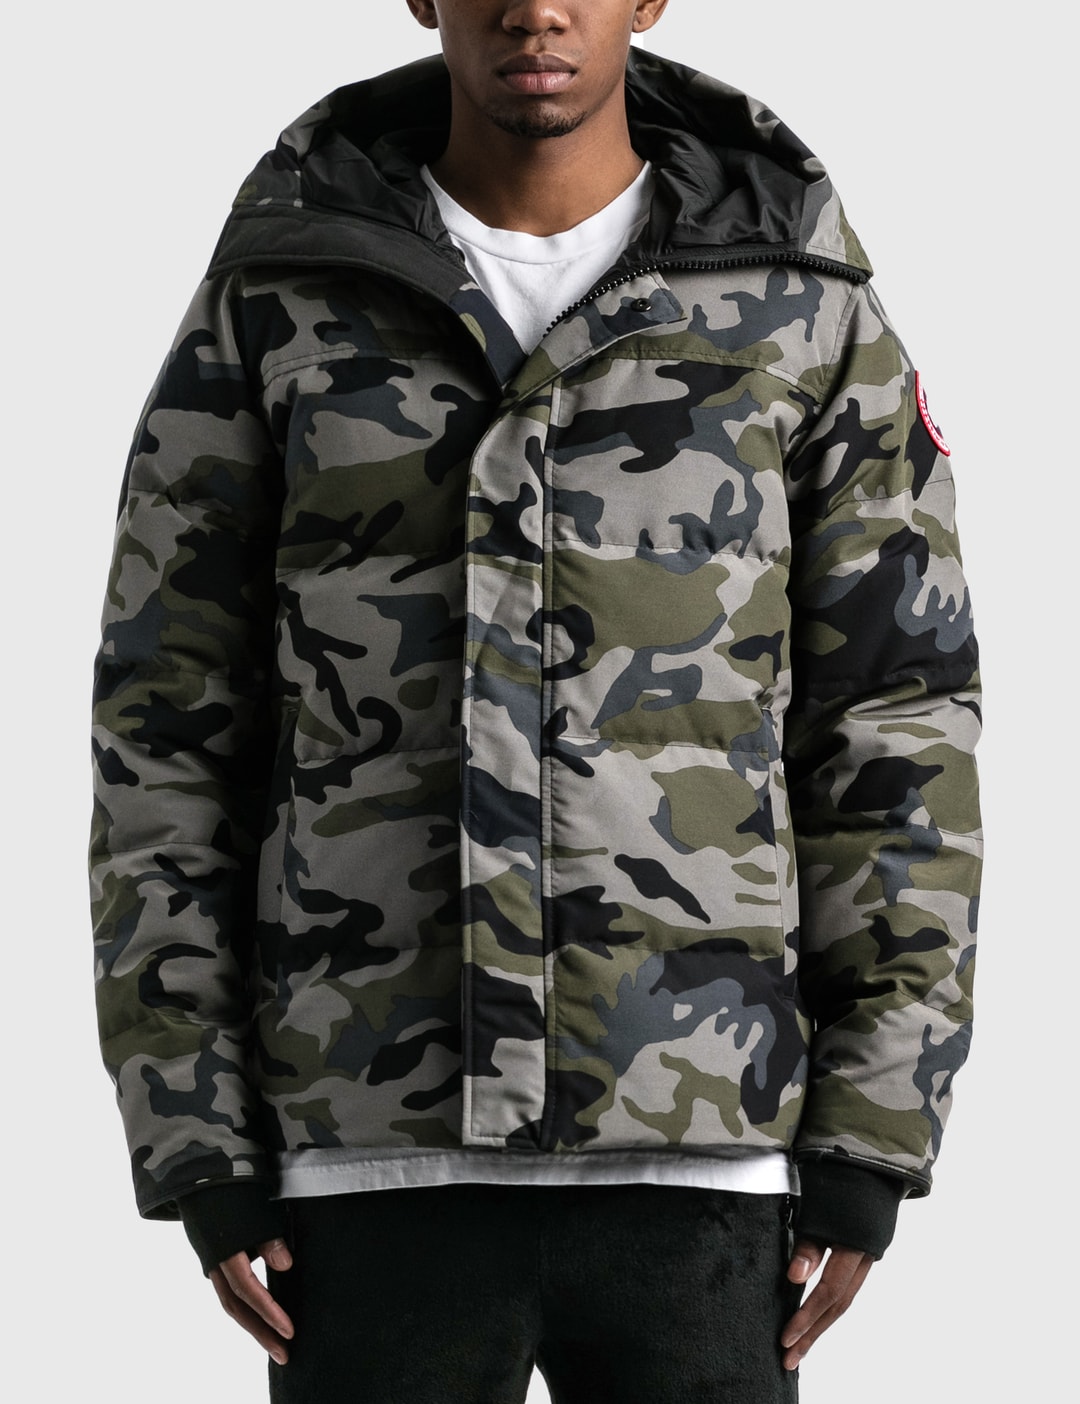 Canada Goose - Macmillan Parka | HBX - Globally Curated Fashion and Lifestyle